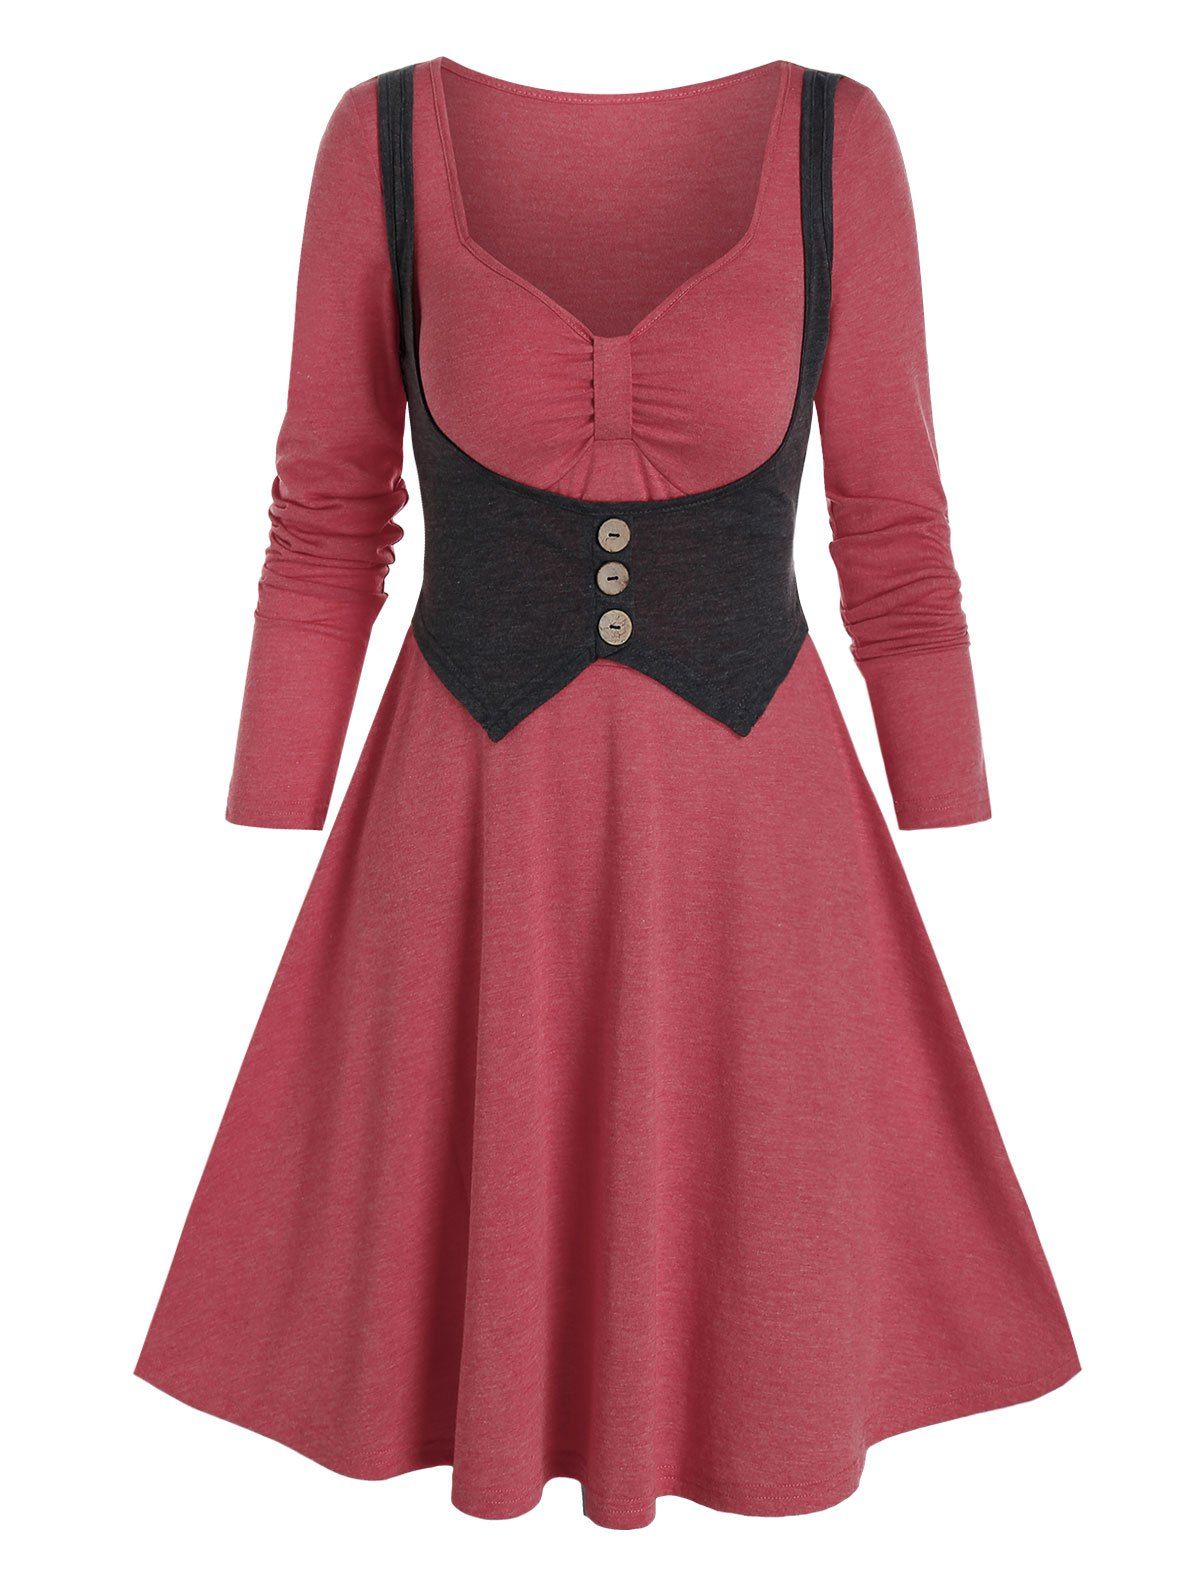 Corset Style Colorblock Dress Casual Two Tone Bicolor Long Sleeve A Line 2 In 1 Dress - RED WINE M